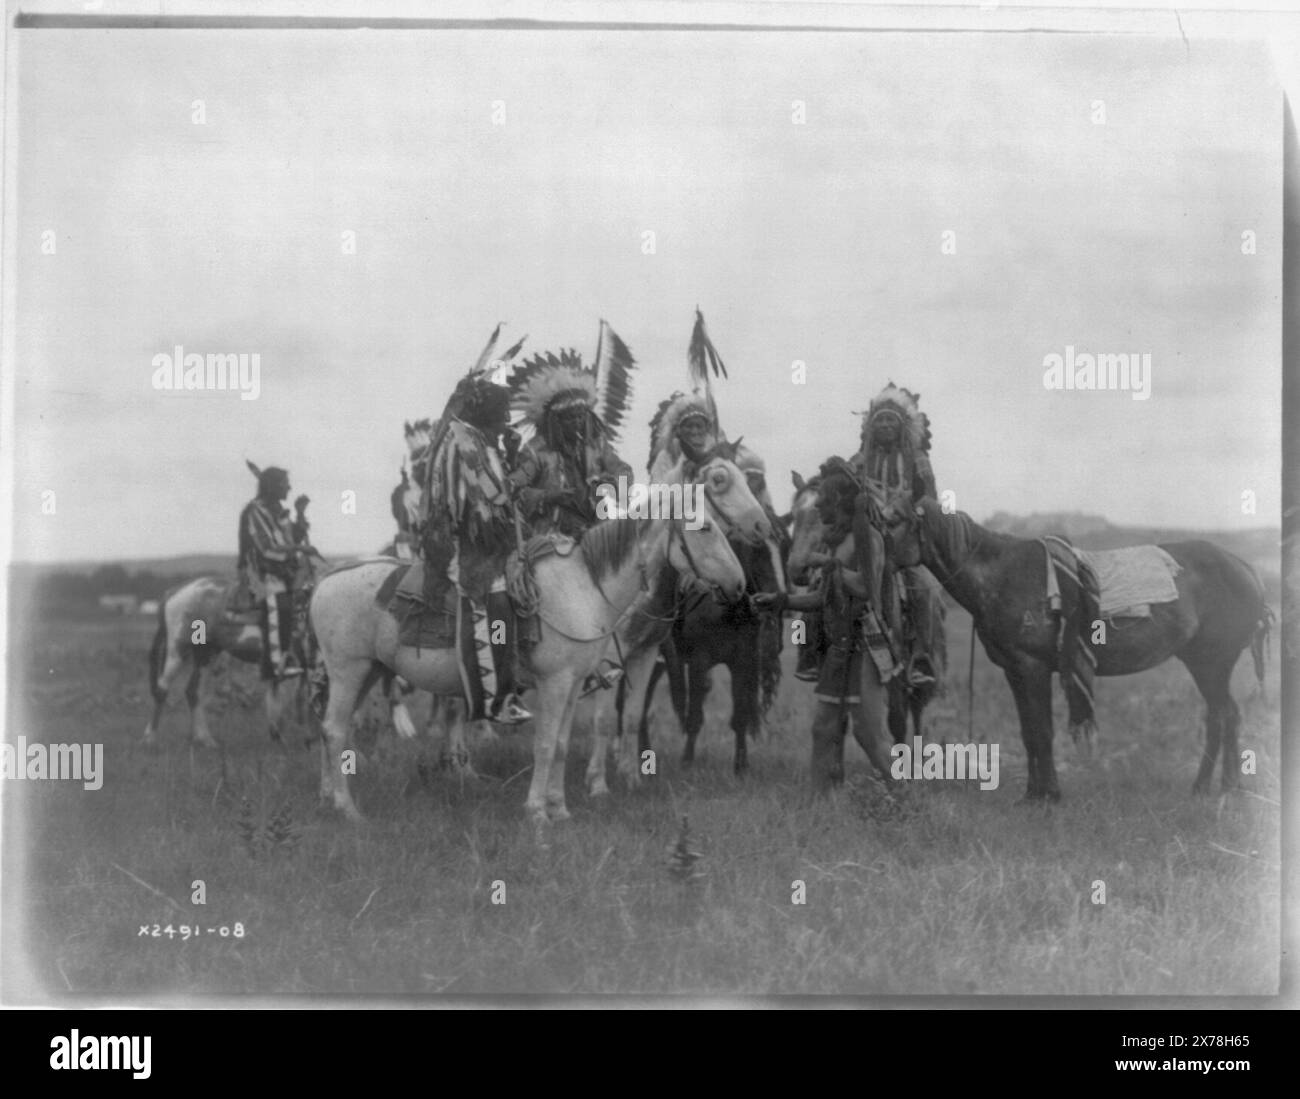 The Parley, Curtis no. 2491-08., On verso: Wounded Knee., Forms part of: Edward S. Curtis Collection ., Published in: The North American Indian / Edward S. Curtis. [Seattle, Wash.] : Edward S. Curtis, 1907-30, v. 3, p. 92.. Indians of North America, 1900-1910. , Dakota Indians, 1900-1910. , War bonnets, 1900-1910. , Horses, 1900-1910. Stock Photo